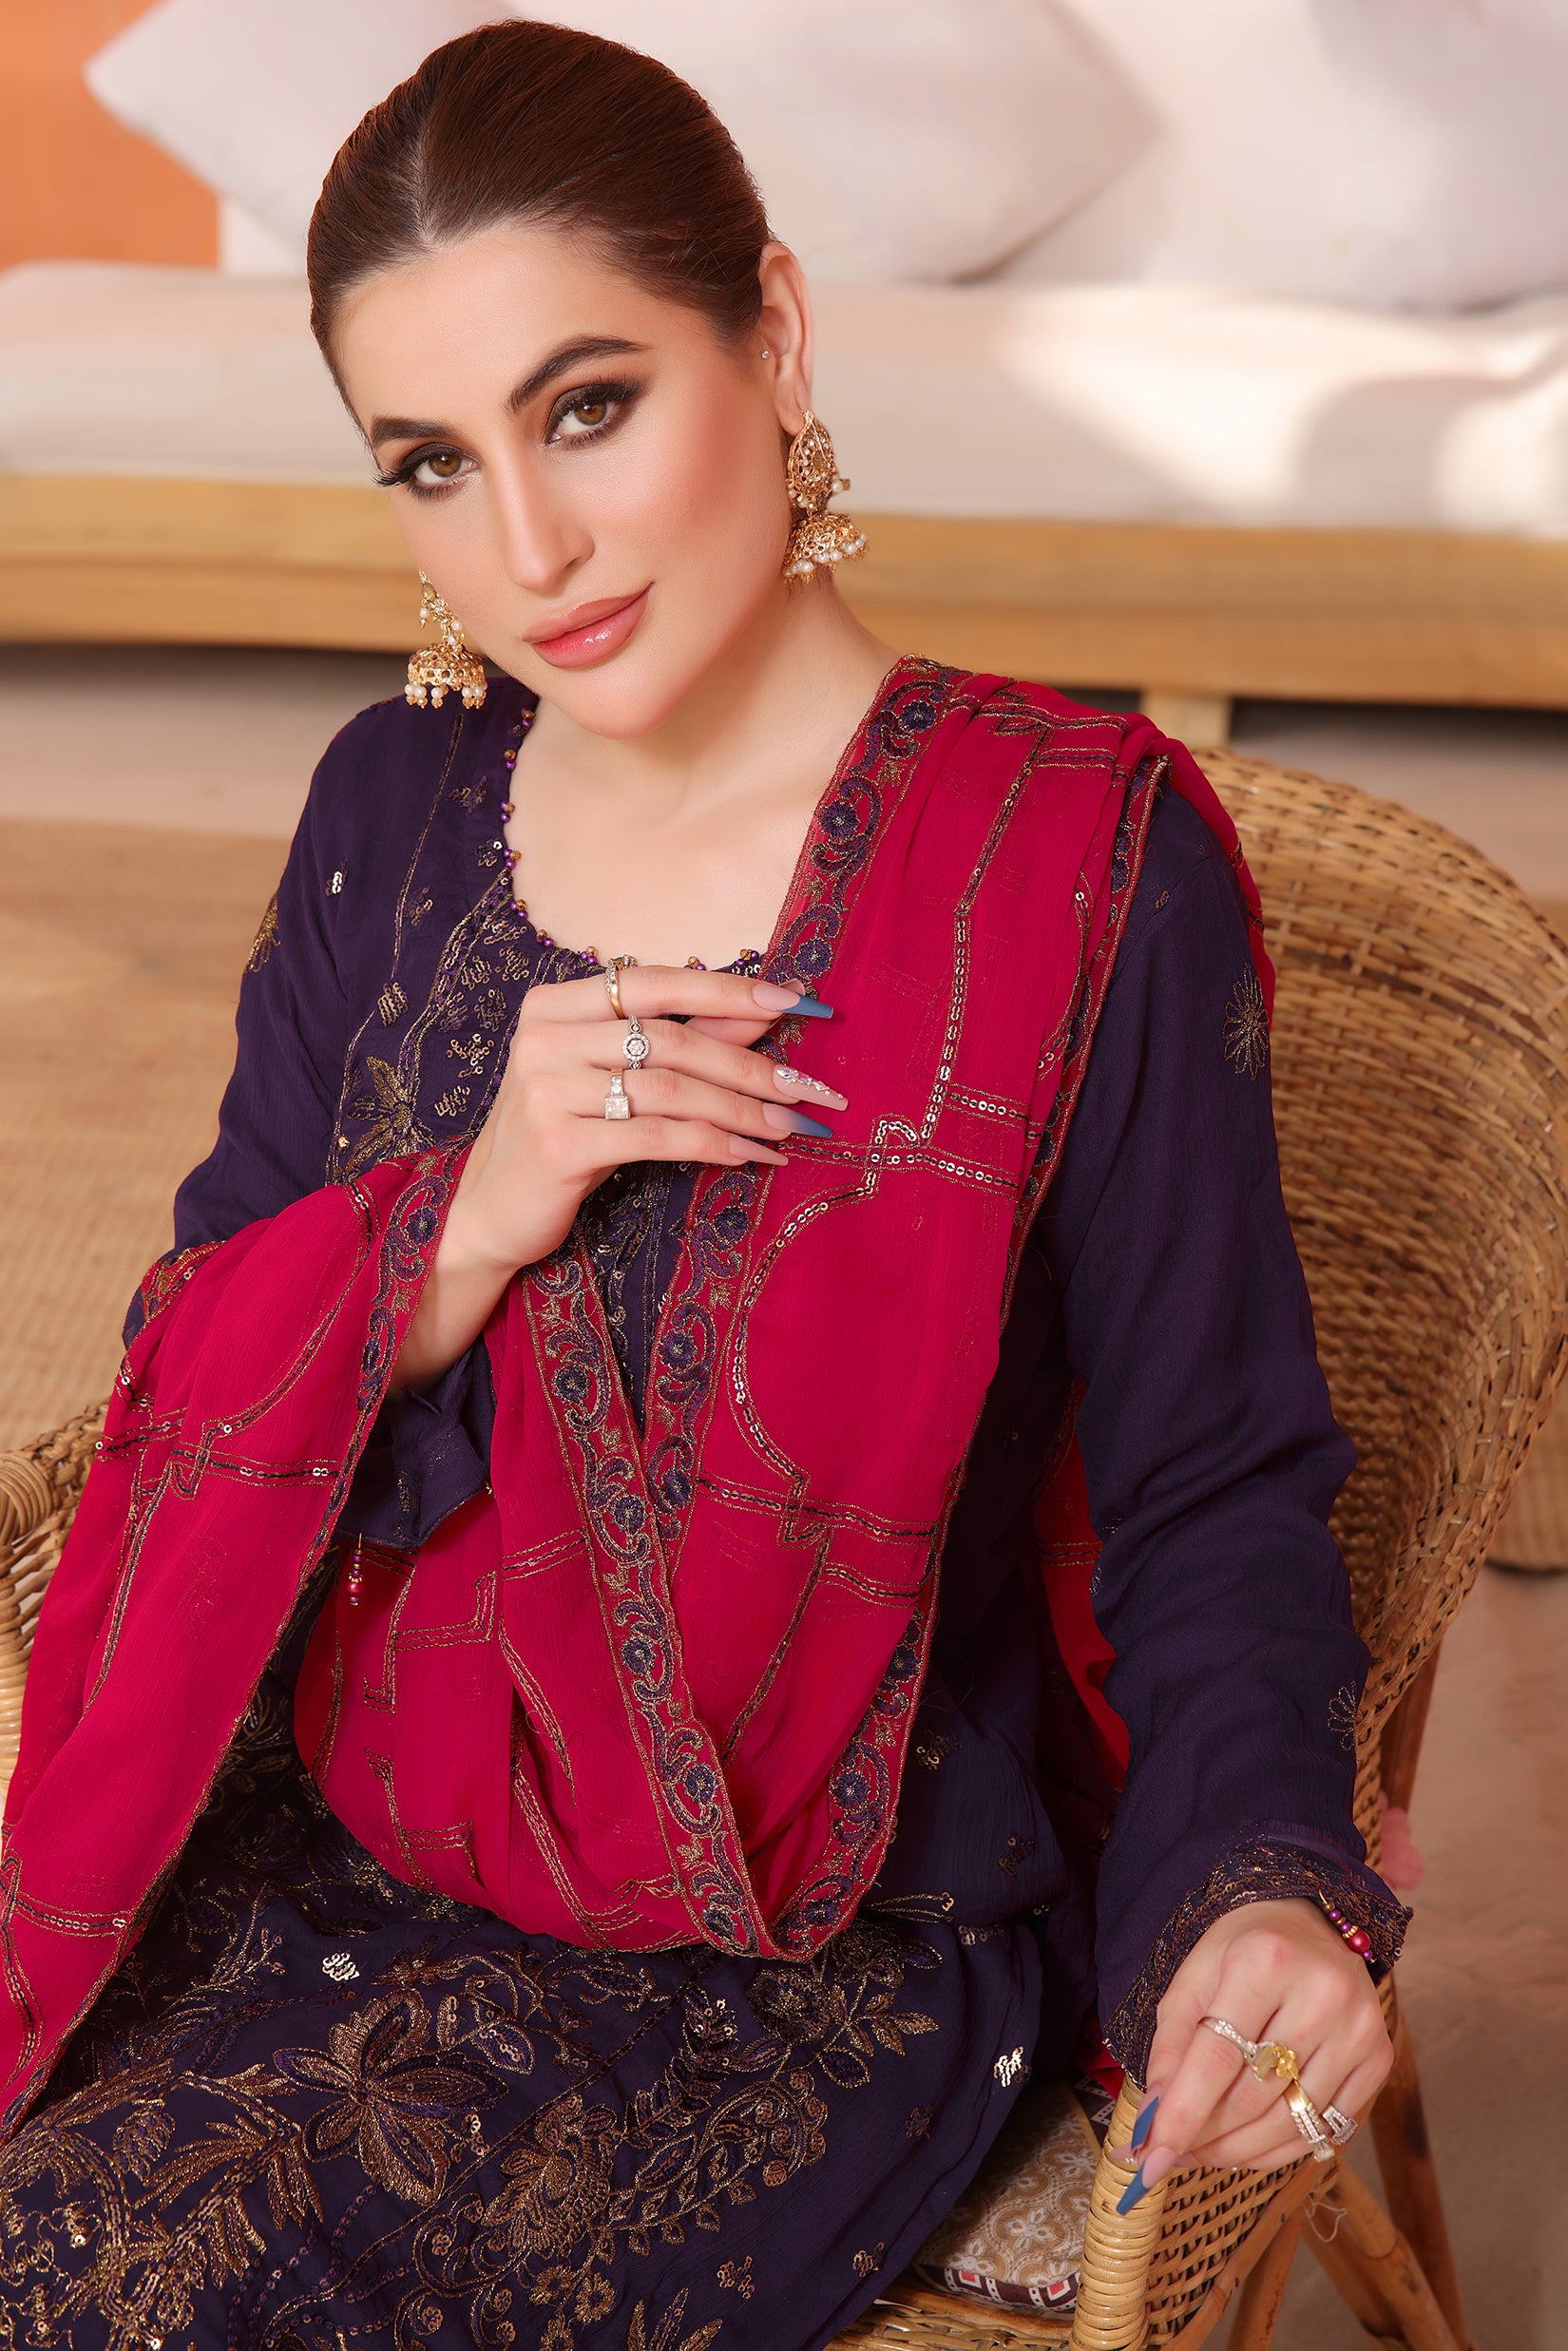 Deep plum 3 piece semi stitched suit for her. Contrast pink chiffon heavy dupatta.